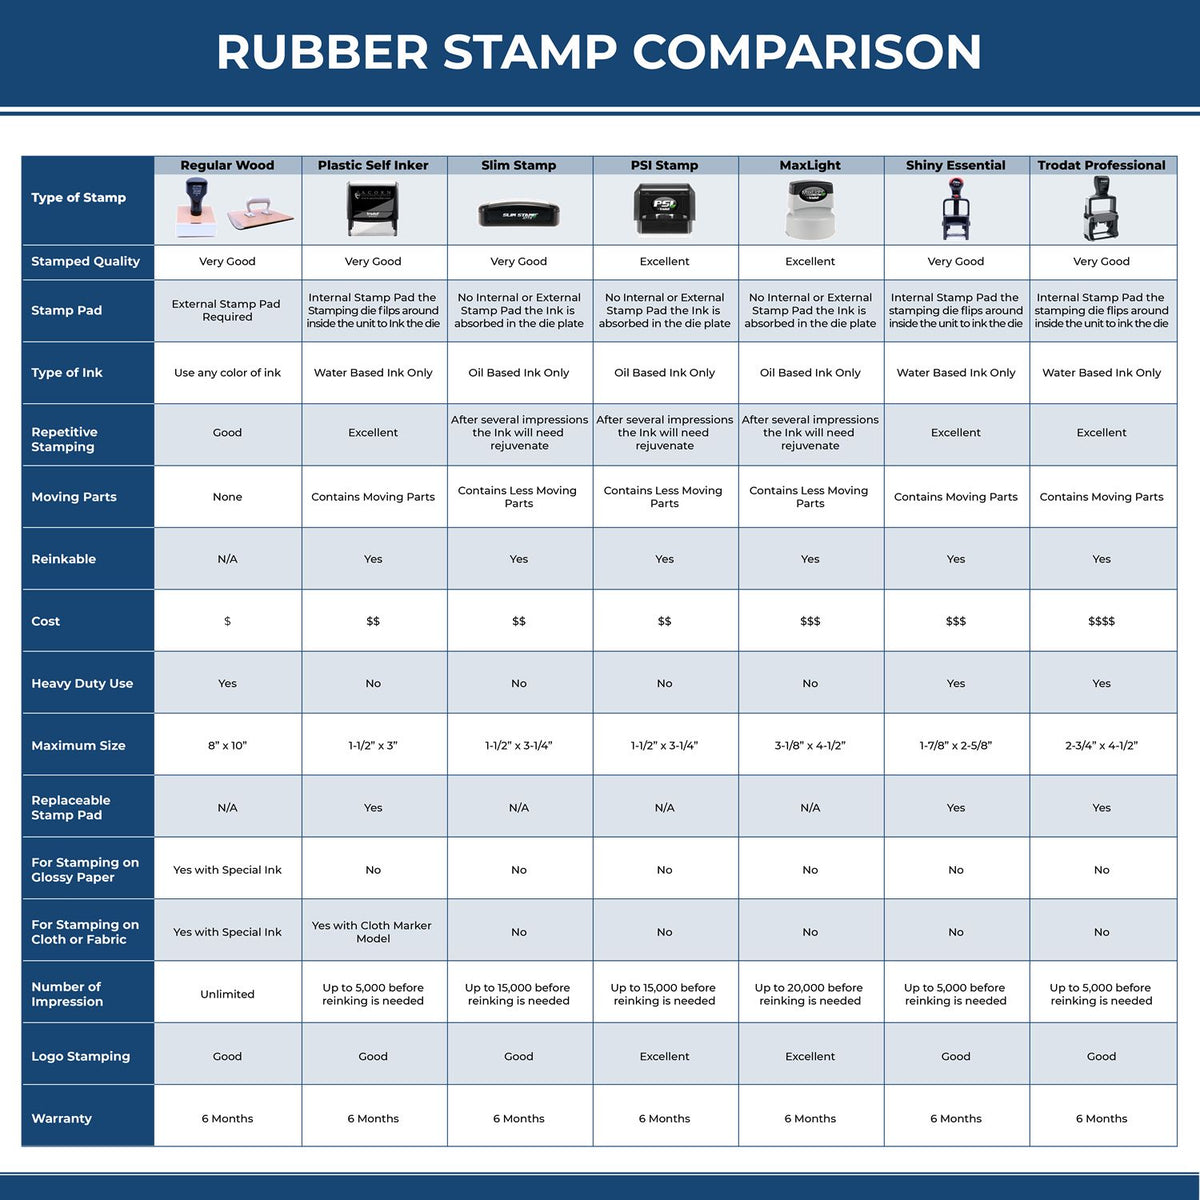 Large Co Pay Rubber Stamp 4548R Rubber Stamp Comparison